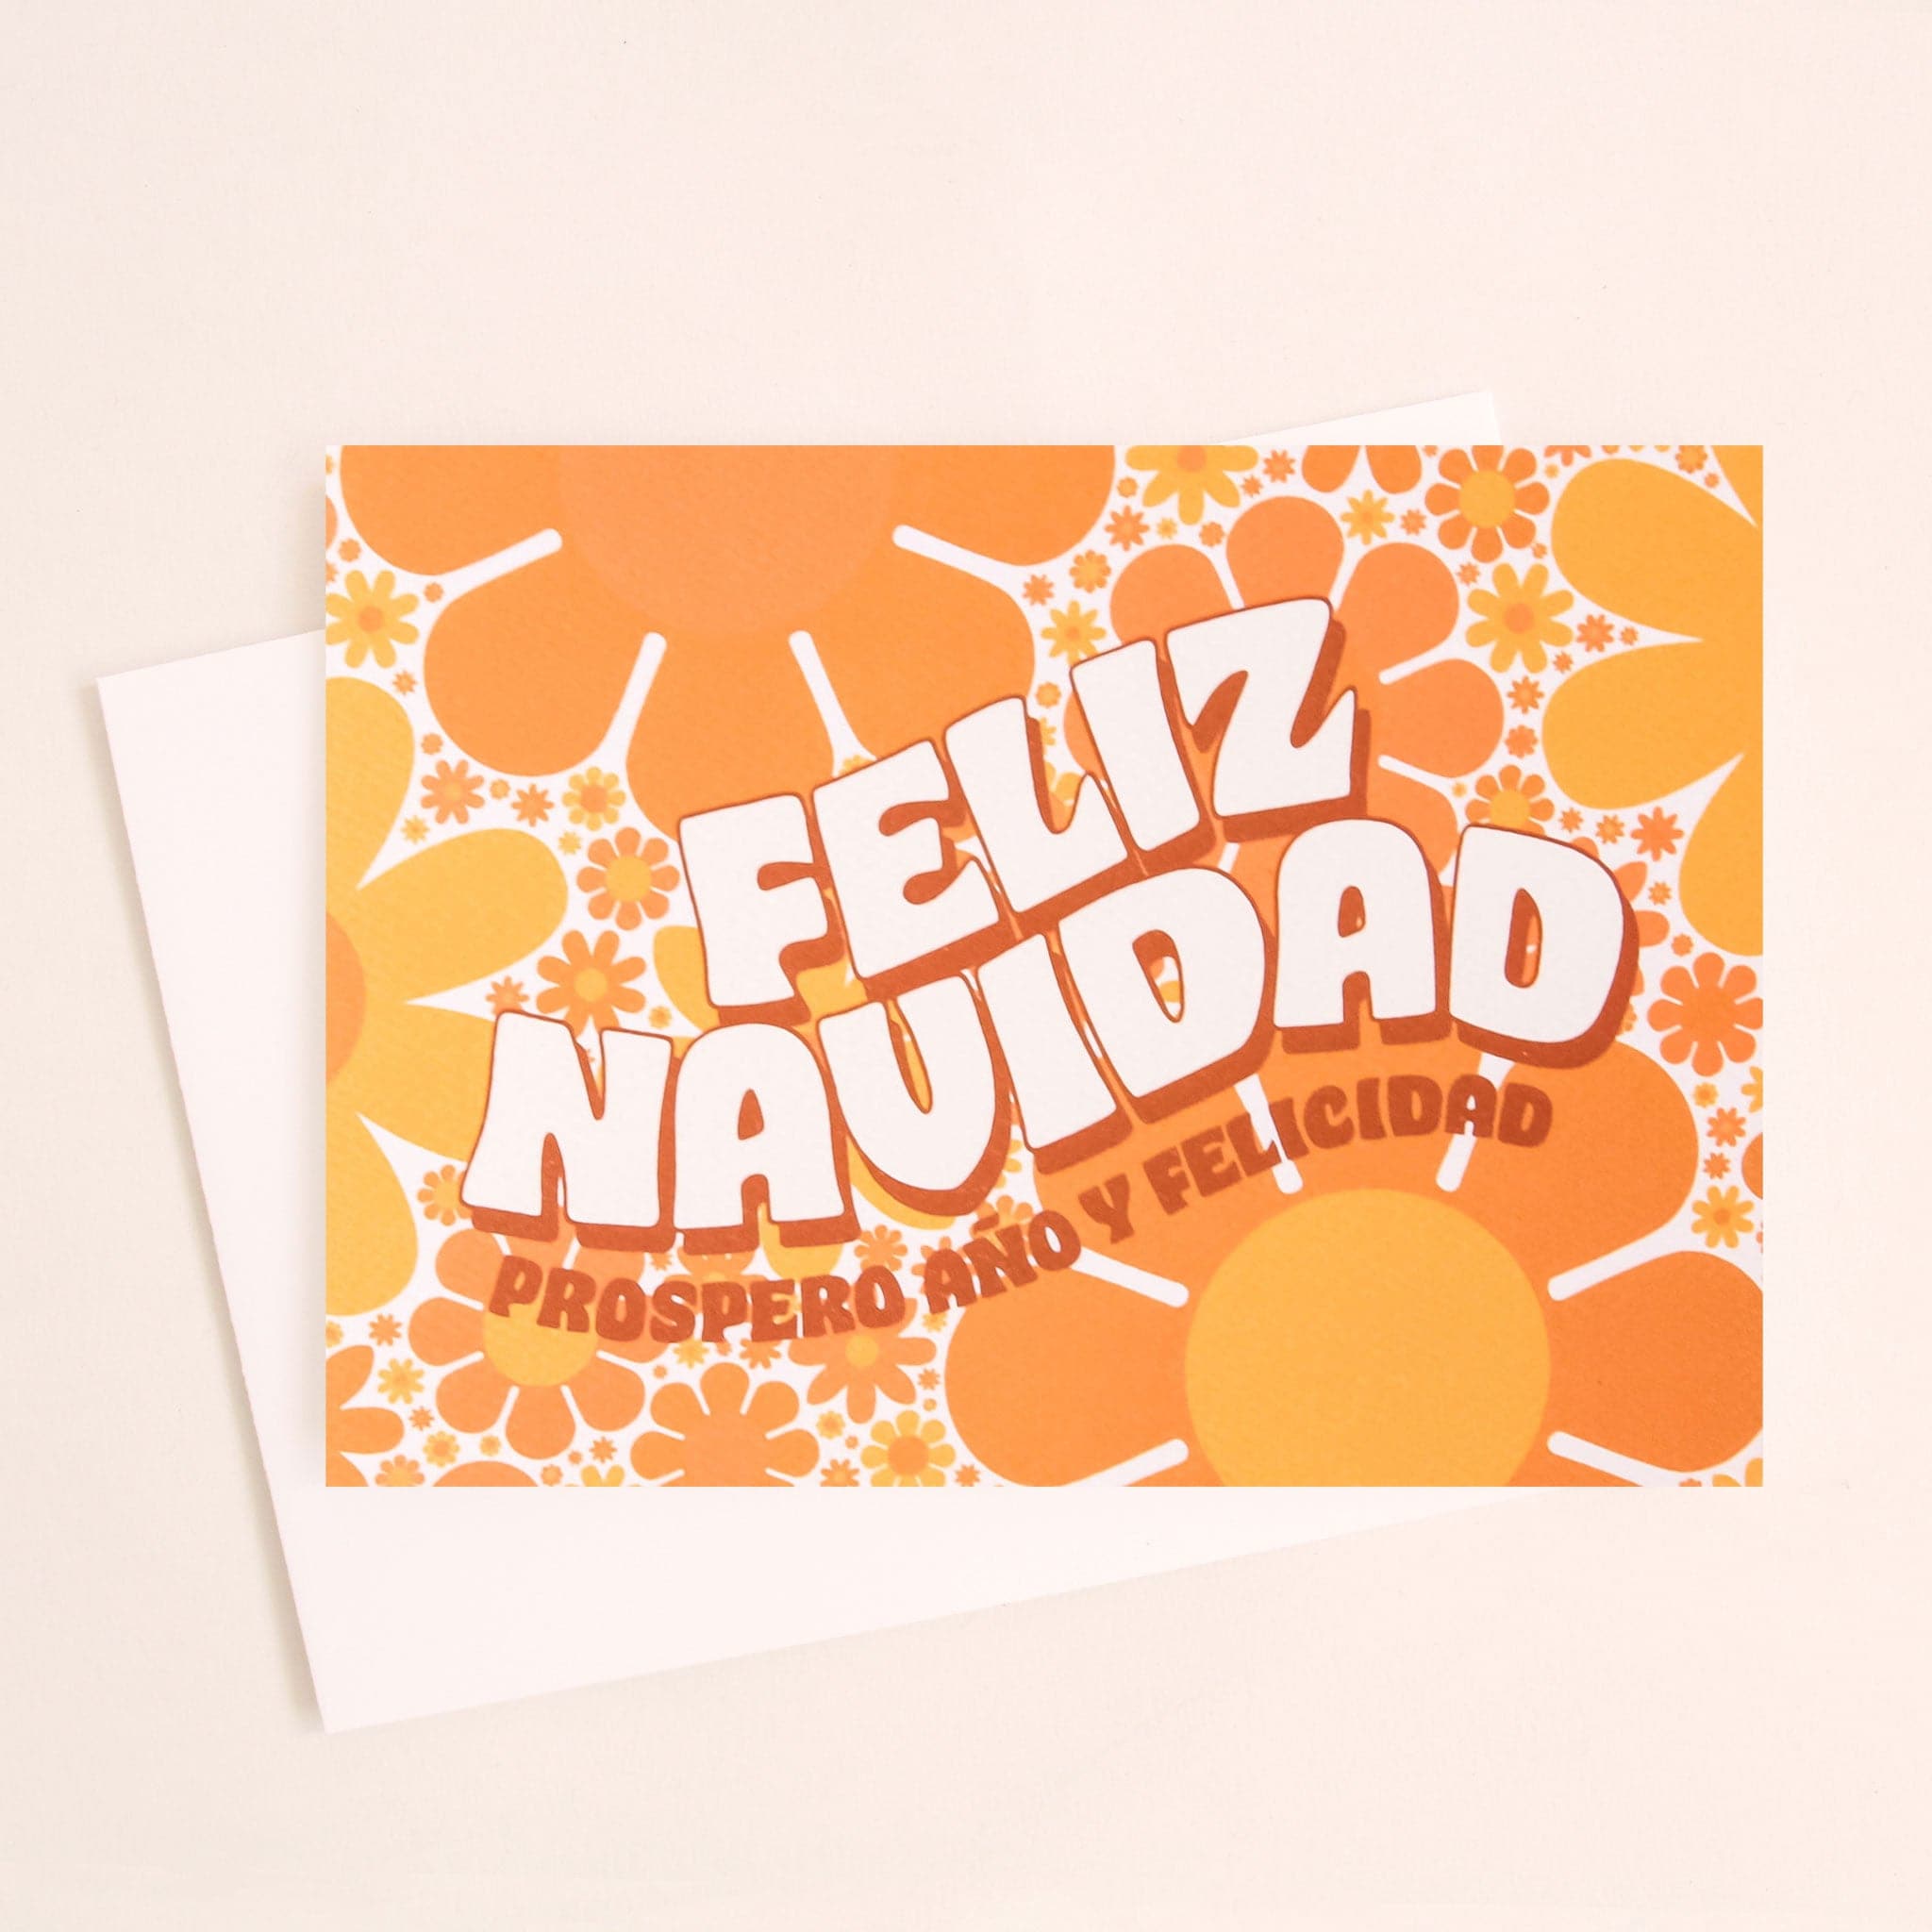 Greeting card filled with yellow and orange retro flower print. The card reads &#39;Feliz Navidad&#39; in white curved bubble letters. Below reads &#39;prosper año y felicidad&#39; in rust colored lettering. The card is accompanied by a solid white envelope. 